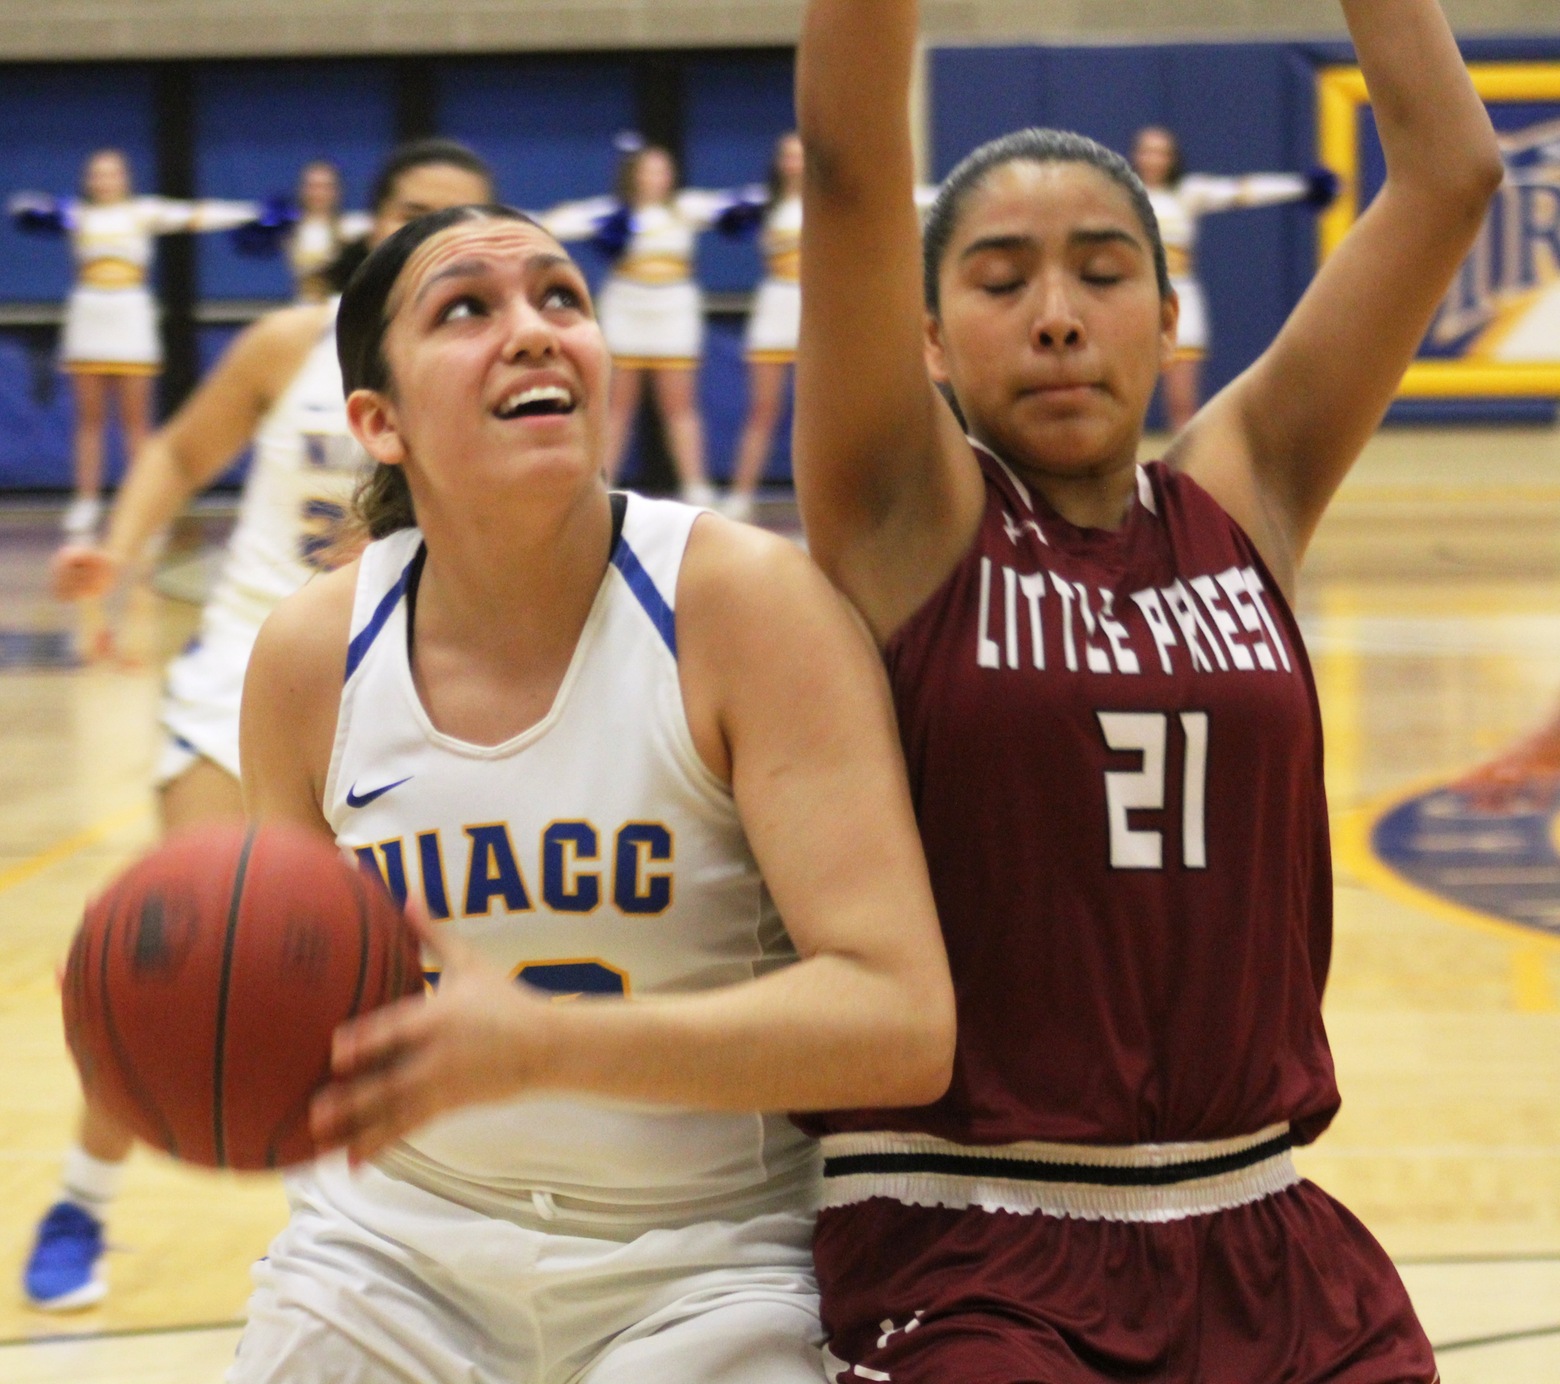 Autam Mendez led the Lady Trojans with 26 points and 16 rebounds on Wednesday.